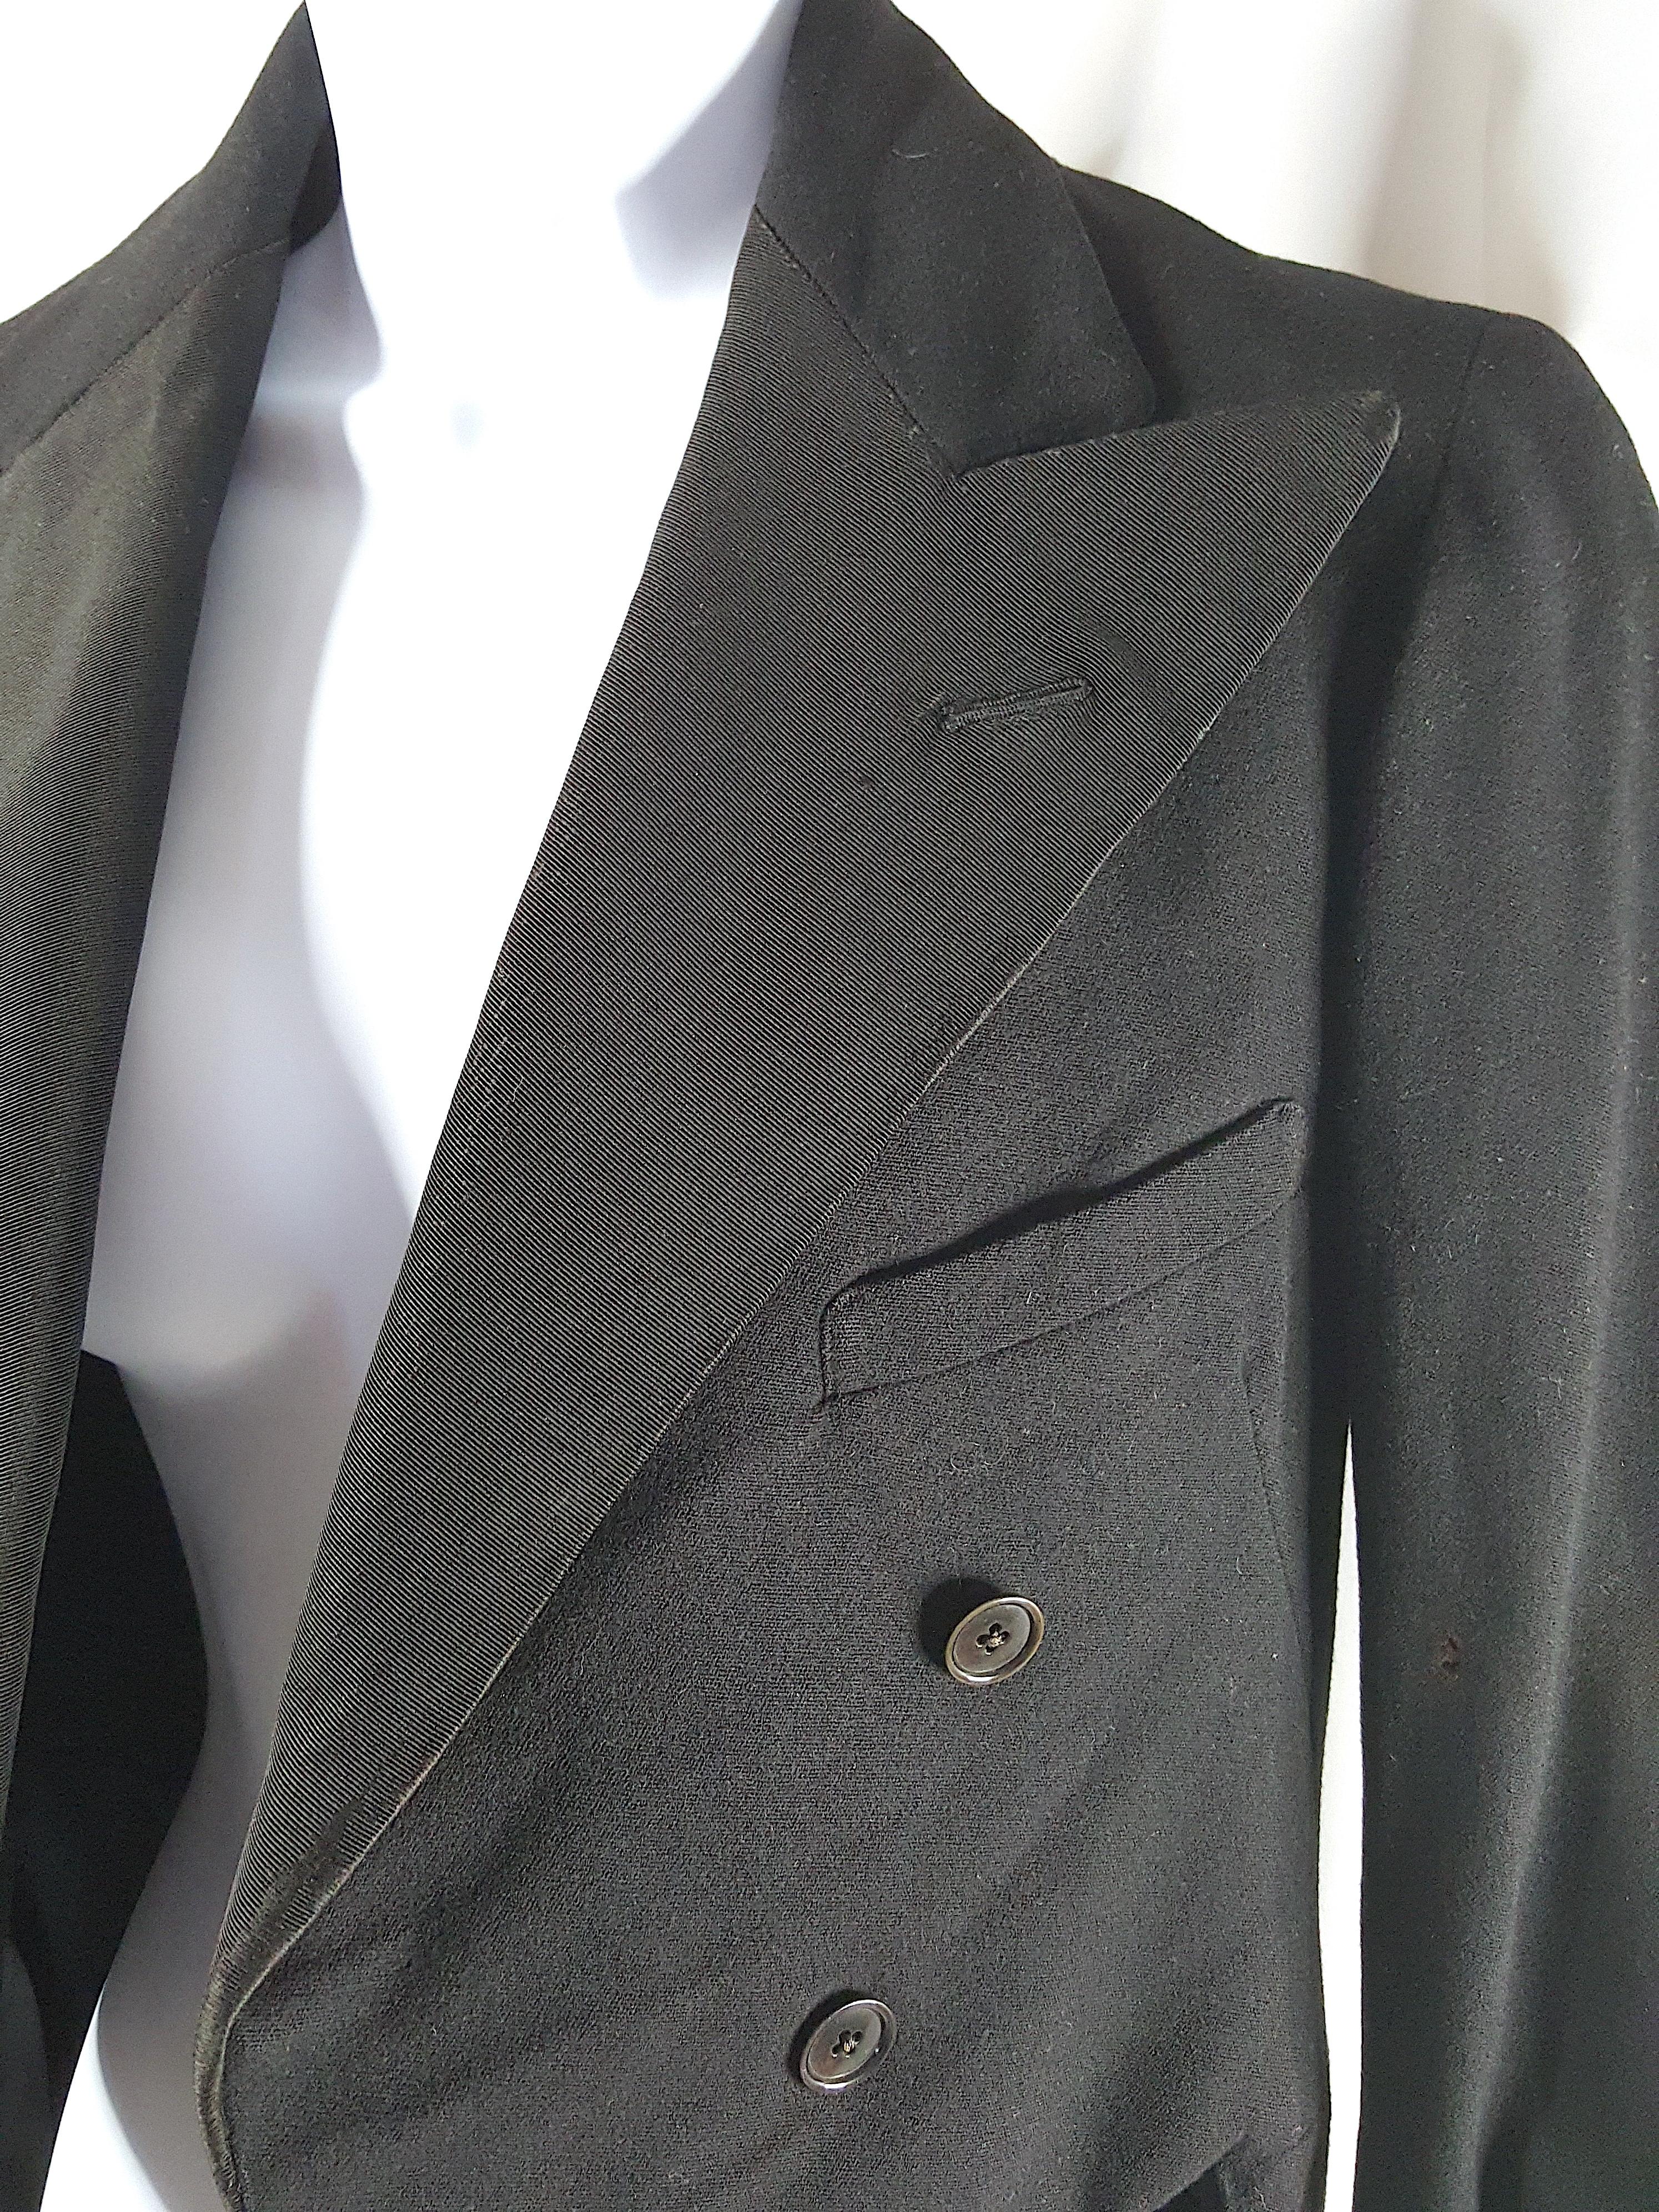 Couture Antique Tuxedo Wool Ribbed&QuiltedSatin FullyLined&Padded Black Tailcoat In Fair Condition For Sale In Chicago, IL